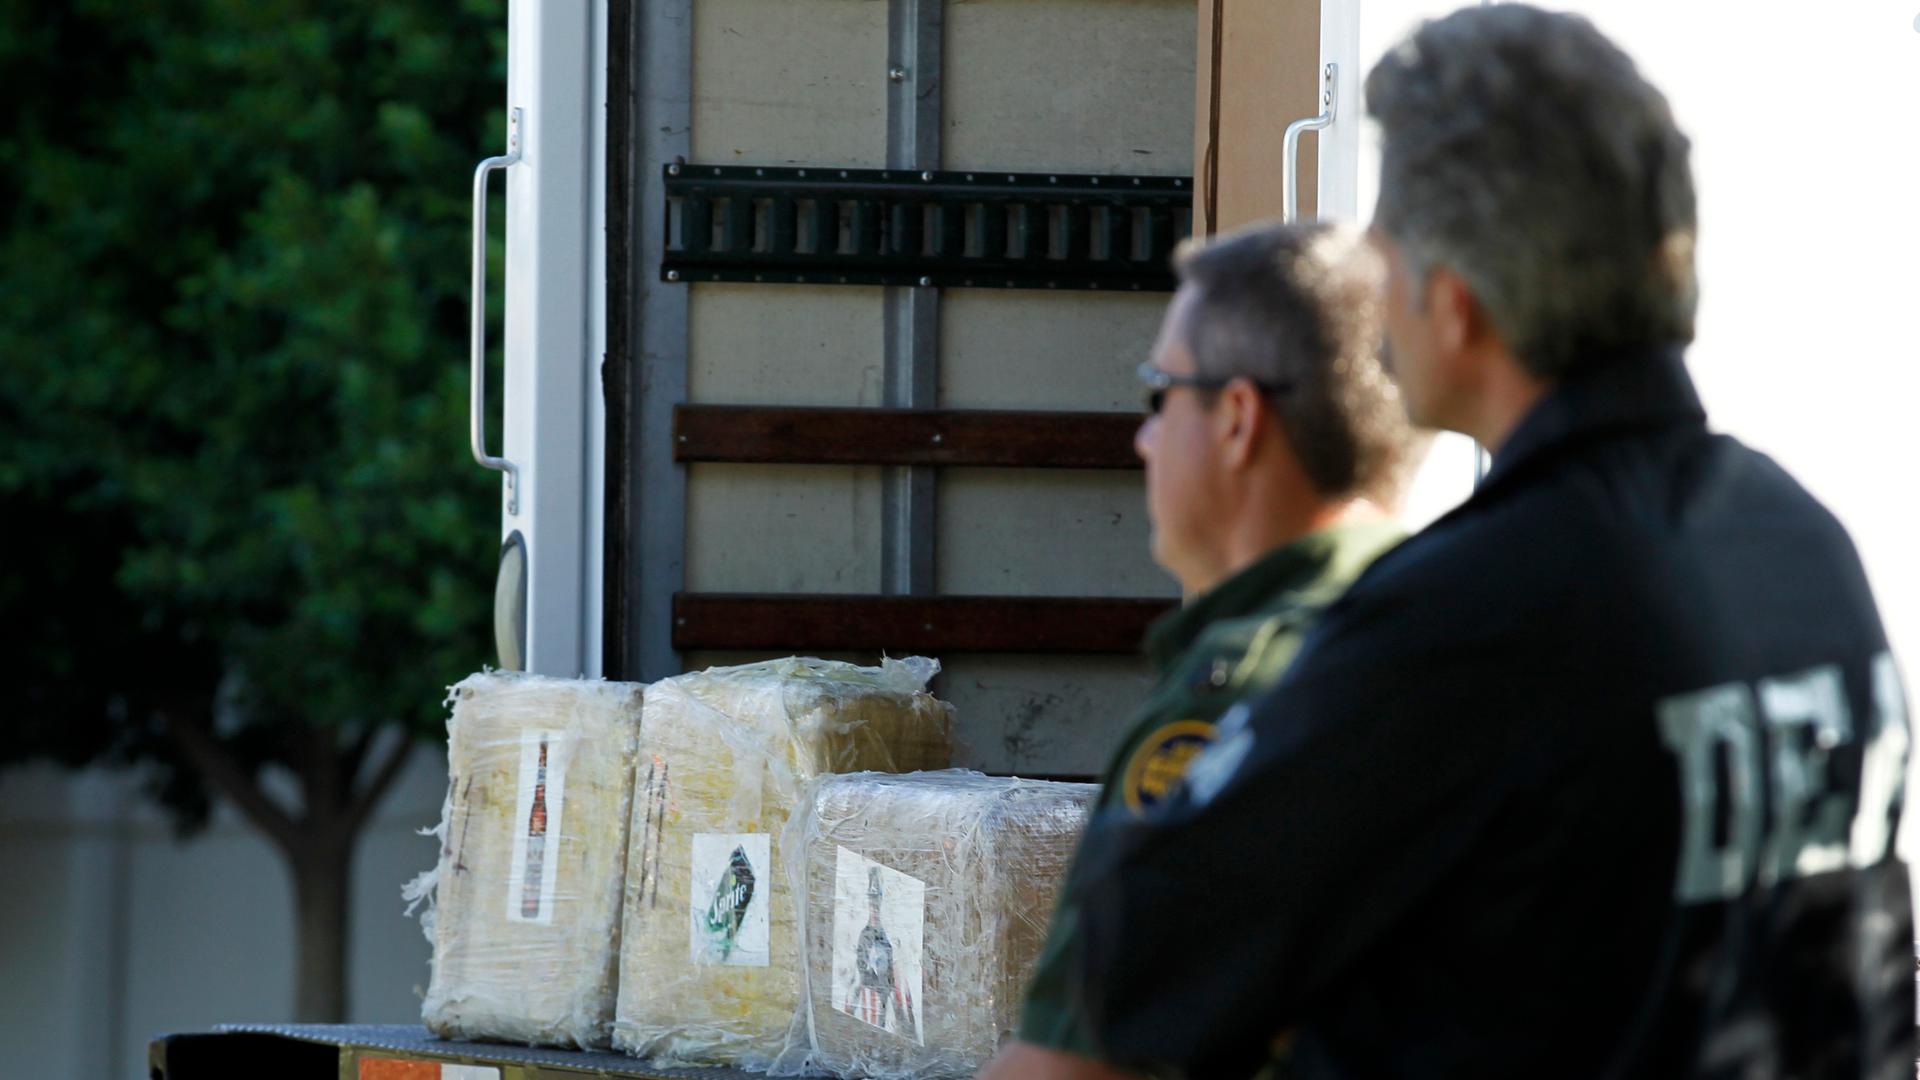 A DEA agent and a US Border Patrol officer stand next to some of the over 14 tons of marijuana seized after discovering a major cross-border drug tunnel linking warehouses in Tijuana, Mexico, and Otay Mesa, California, on November 16, 2011.